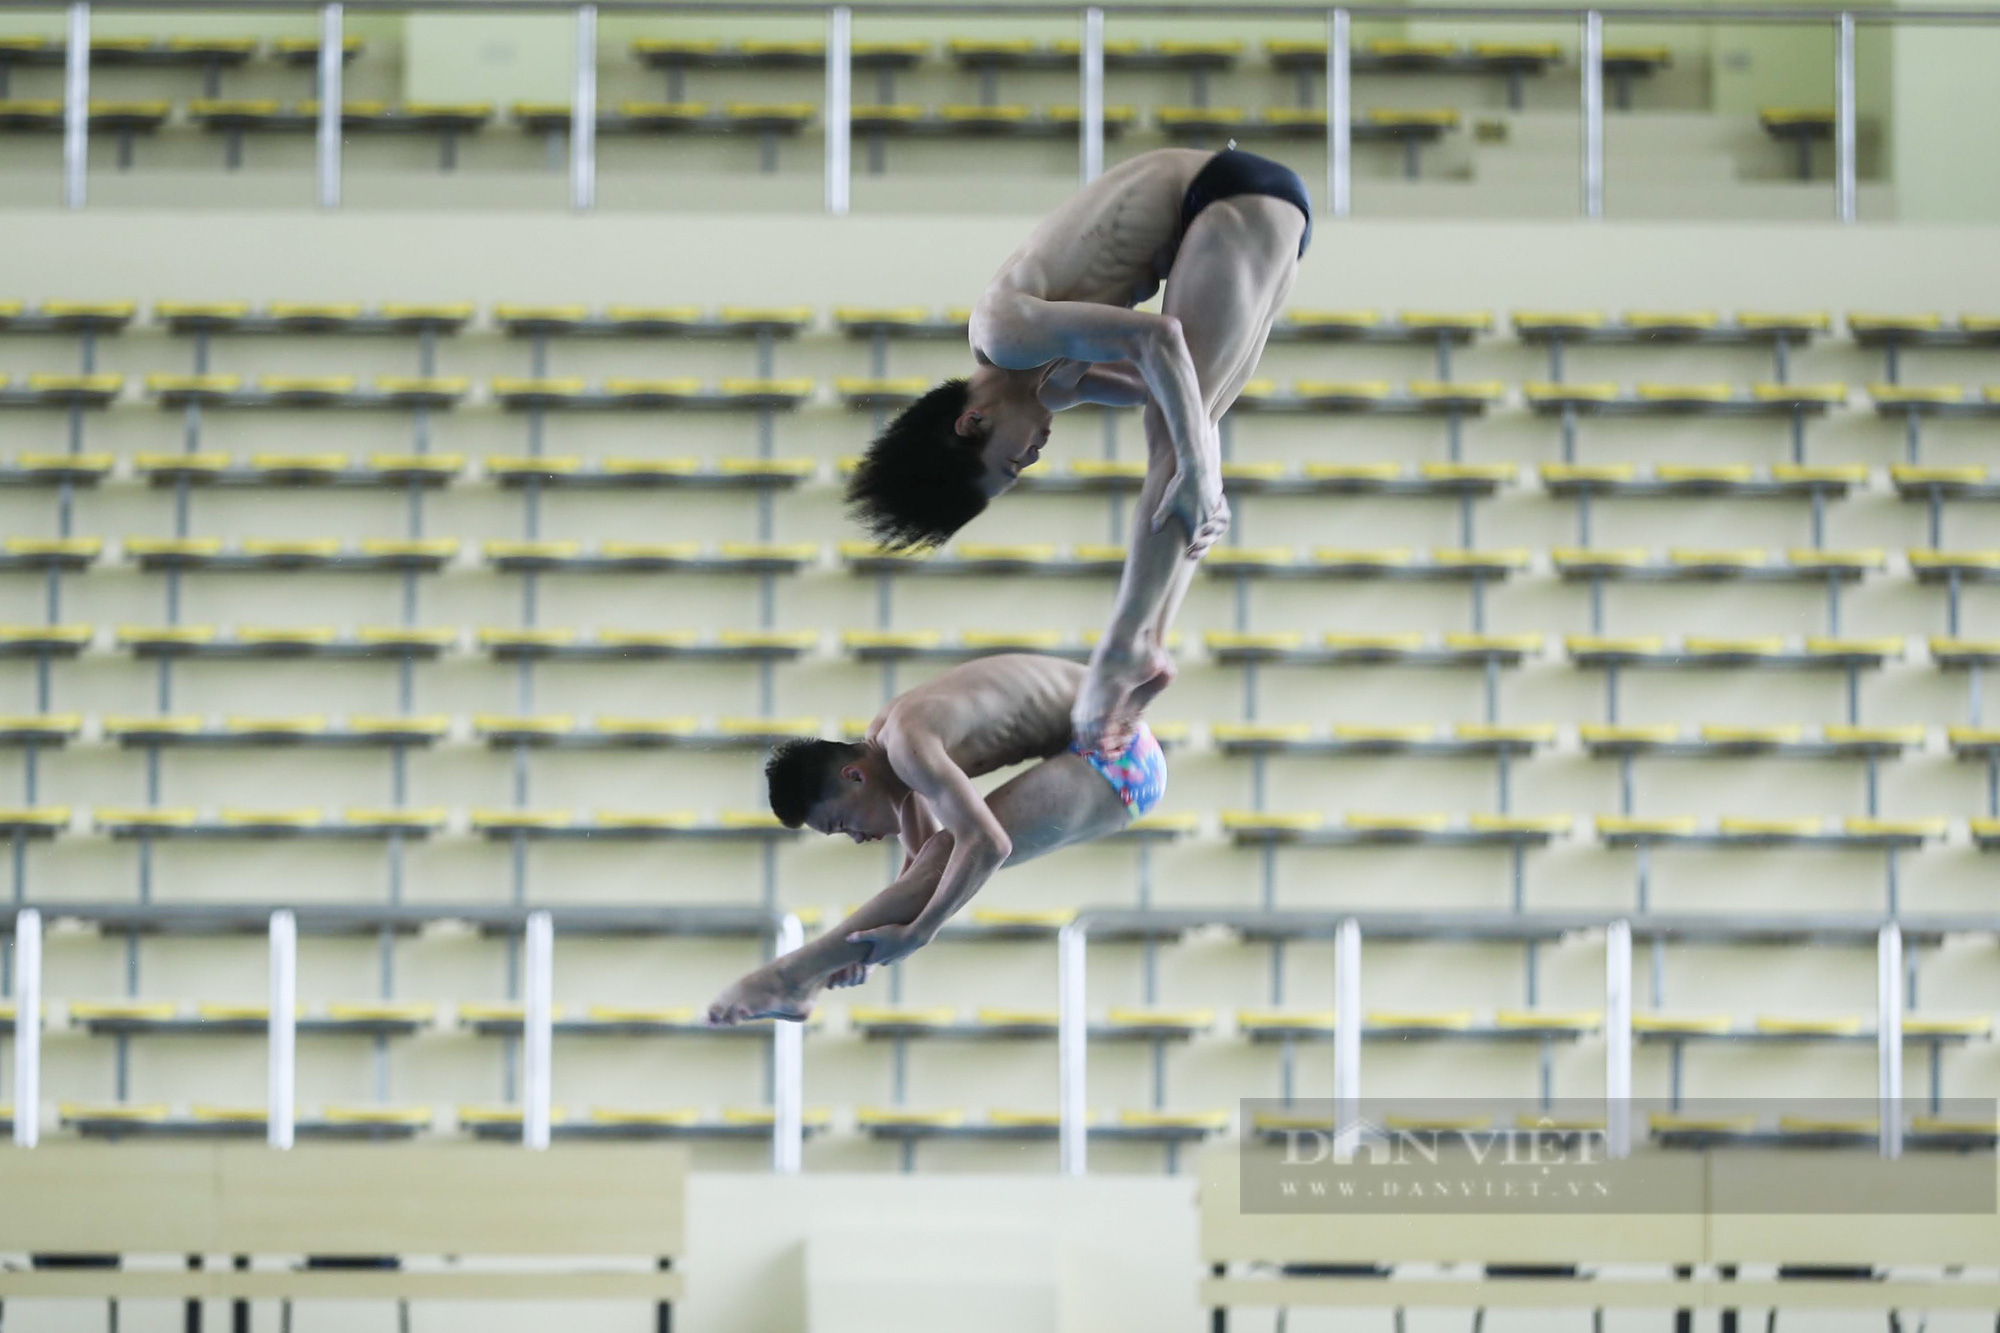 Watch with your own eyes the Vietnamese diving team practice to prepare for the 31st SEA Games - Photo 5.